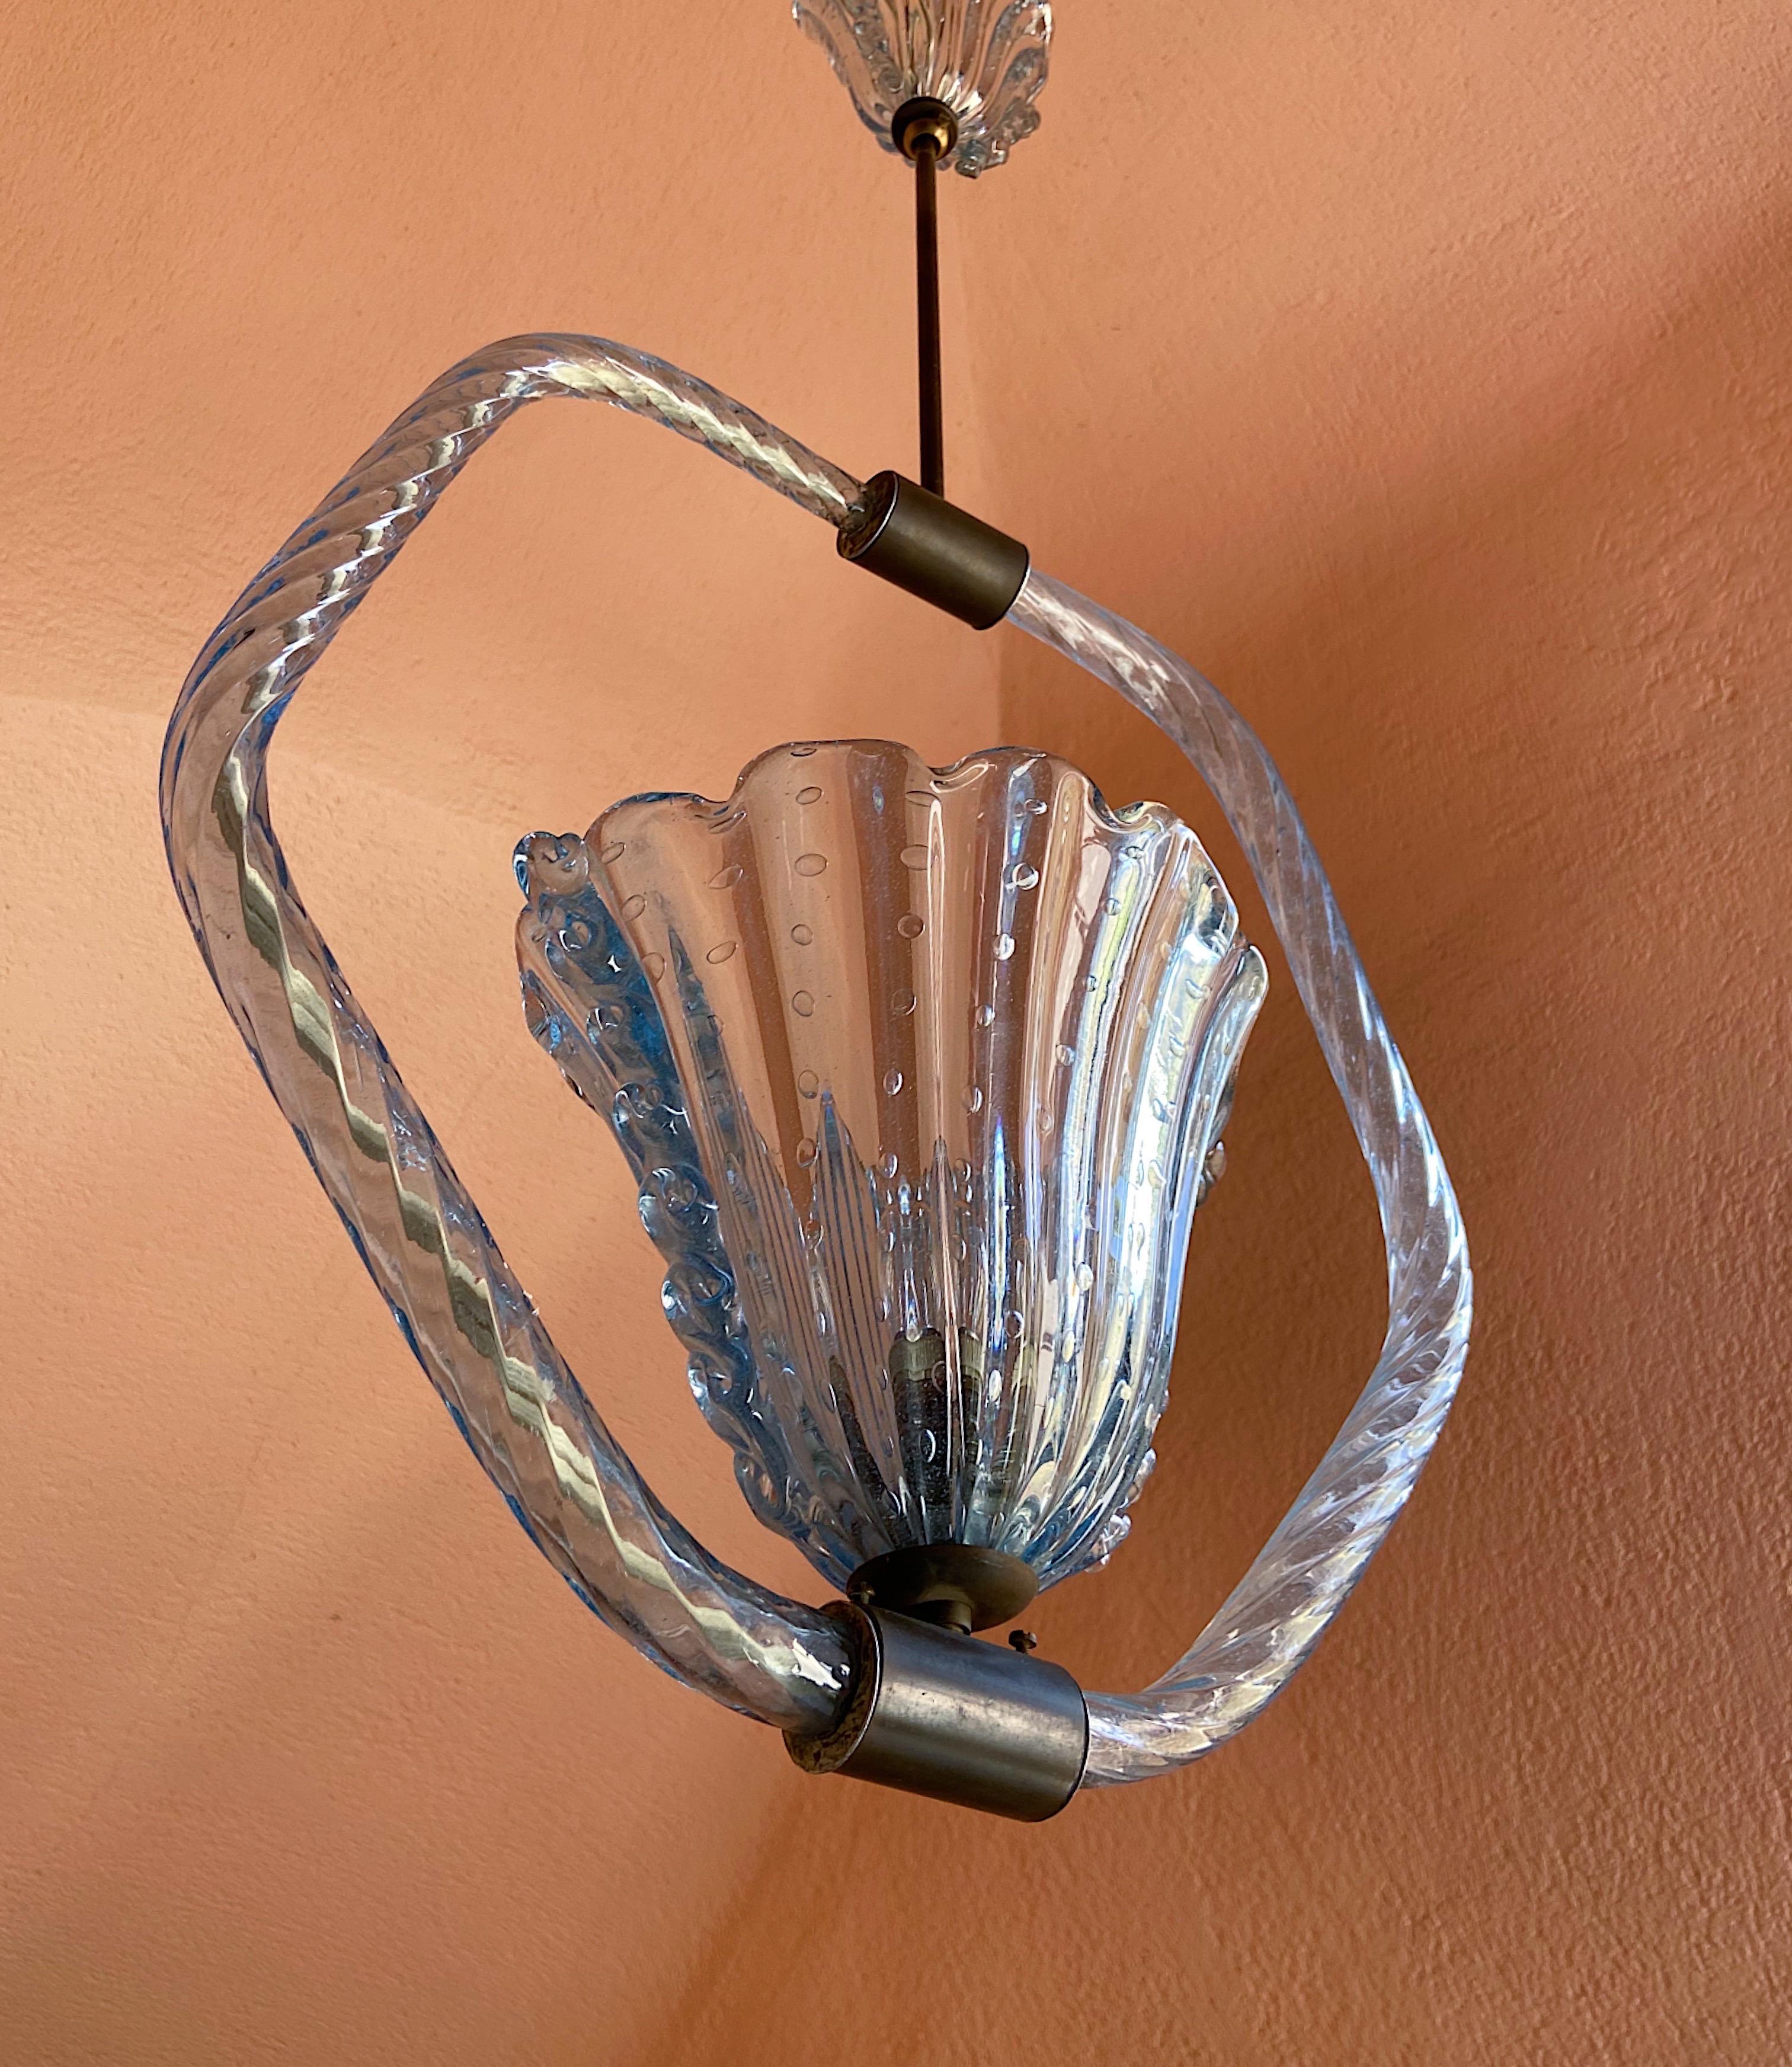 20th Century Art Deco Murano Glas Chandelier by Barovier & Toso, 1930s with Brass